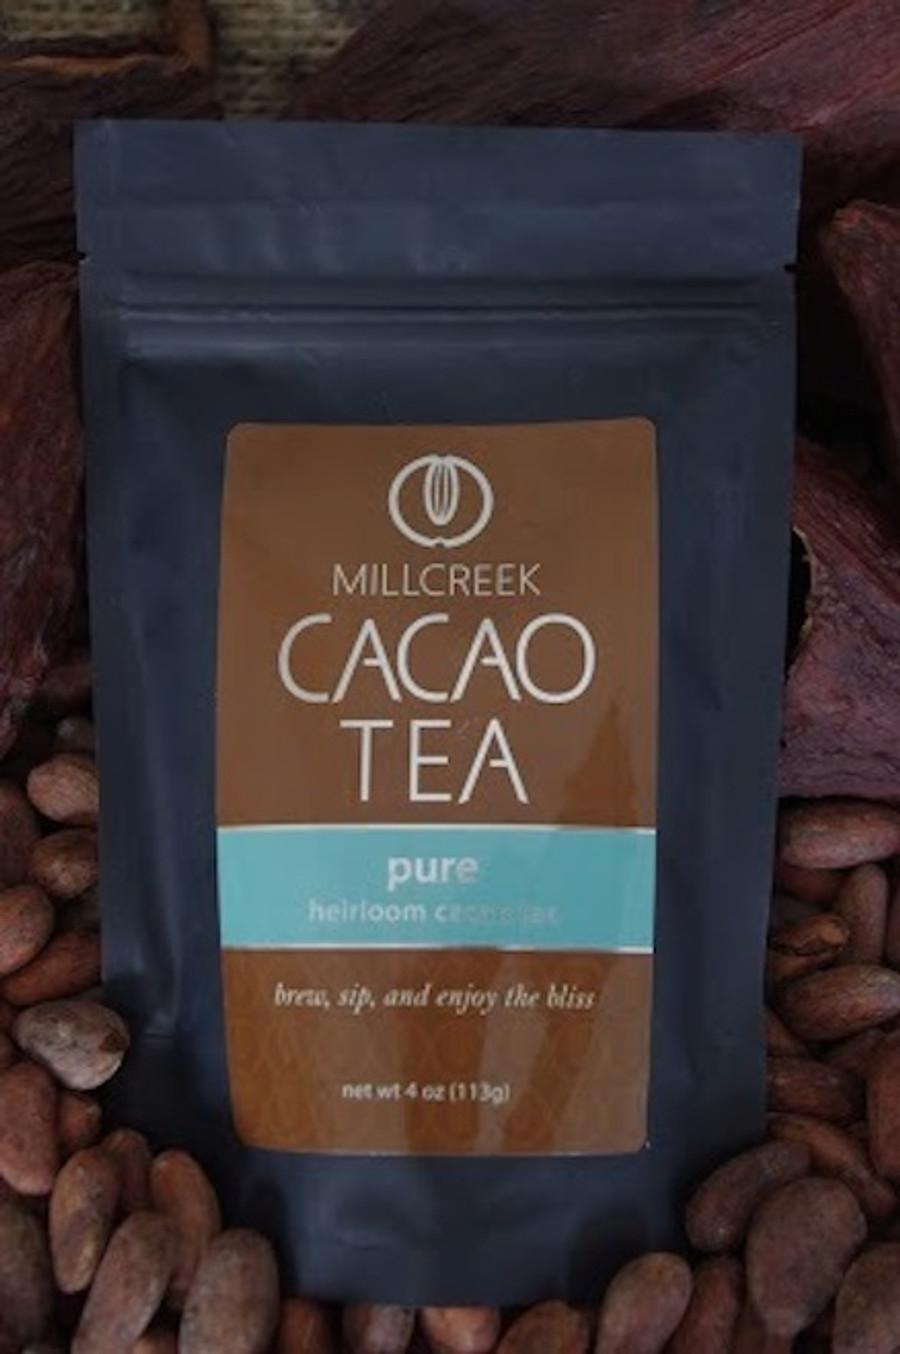 Experience the tranquility, beautiful aromas, and delicate flavors of Cacao Tea.

We introduce a unique blend of tea that combines roasted cacao nibs and theobromine-rich shells into a blissful cup of tea. Made from the same 100% single source Ecuadorian cacao beans used in our artisan chocolate, this tea has a delicate cacao flavor with beautiful aromas. Complement the chocolate nuances with the health benefits of cacao and experience a lovely, relaxing, and blissful tea.

Using our knowledge as farm to bar chocolate makers, we have crafted a delicate cacao tea using our rare, heirloom Arriba Nacional beans. Imported directly from our farmer in the Los Rios region of Ecuador, this exotic and rare bean is roasted to release the beautiful flavors within. This Heirloom Cacao Tea uses both roasted nibs and theobromine-rich shells to create a delicate tea with lovely chocolate nuances.

Cacao Benefits:

Rich in antioxidants, amino acids, and magnesium
Cacao contains Theobromine, said to give a euphoric feeling
Cacao contains Anandamide, an endorphin, whose name appropriately translates as “bliss”
Brew, sip and enjoy the bliss